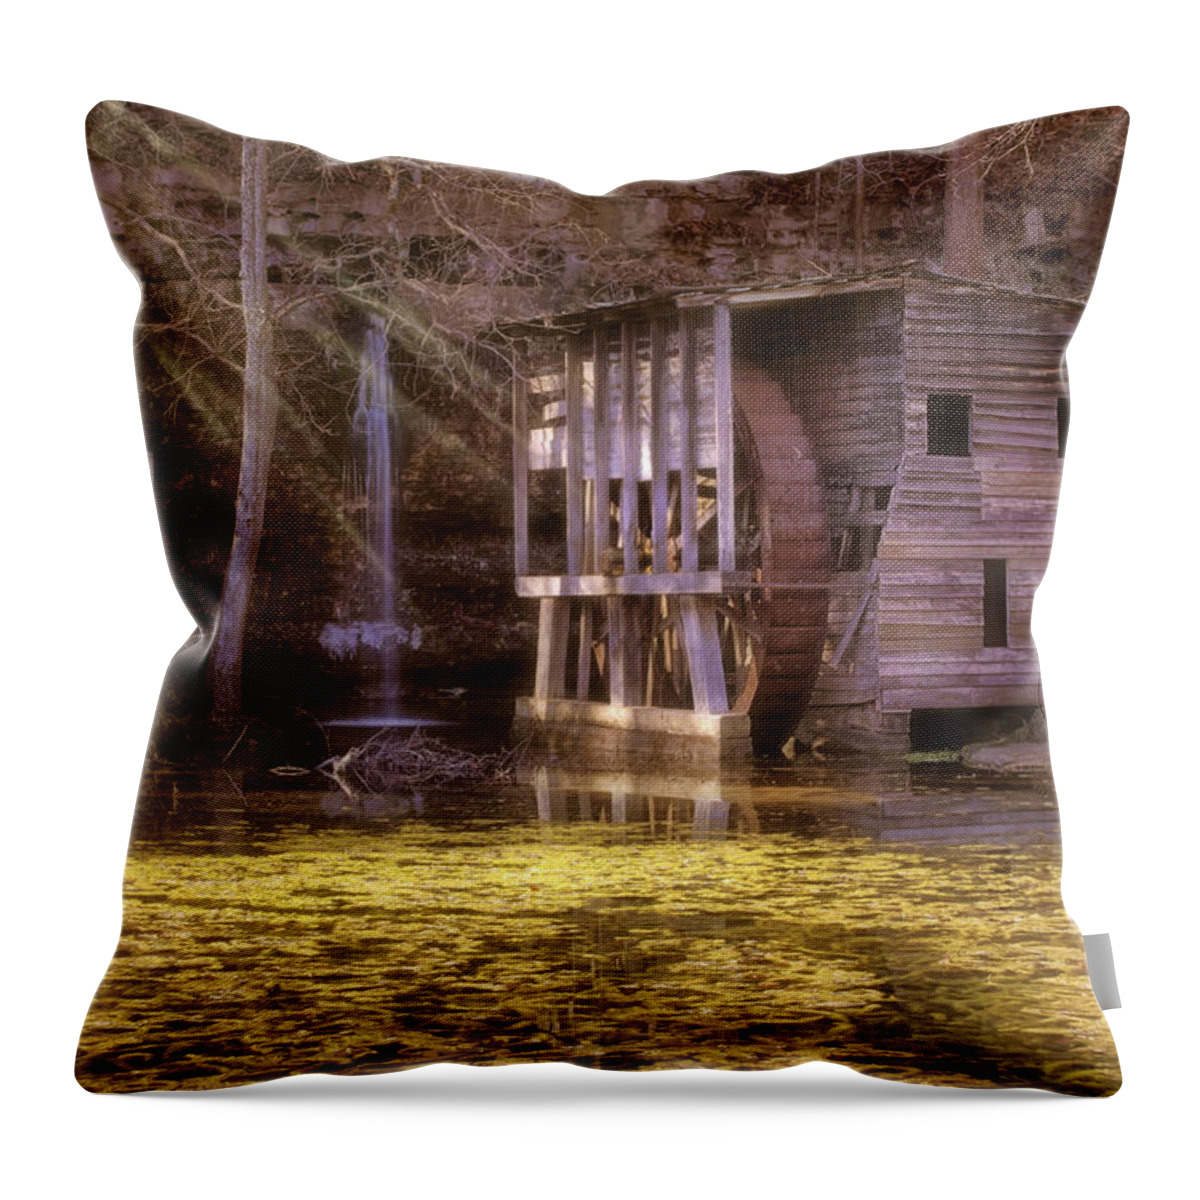 Falling Spring Mill Throw Pillow featuring the photograph Falling Spring Mill - Missouri - Mark Twain National Forest by Jason Politte